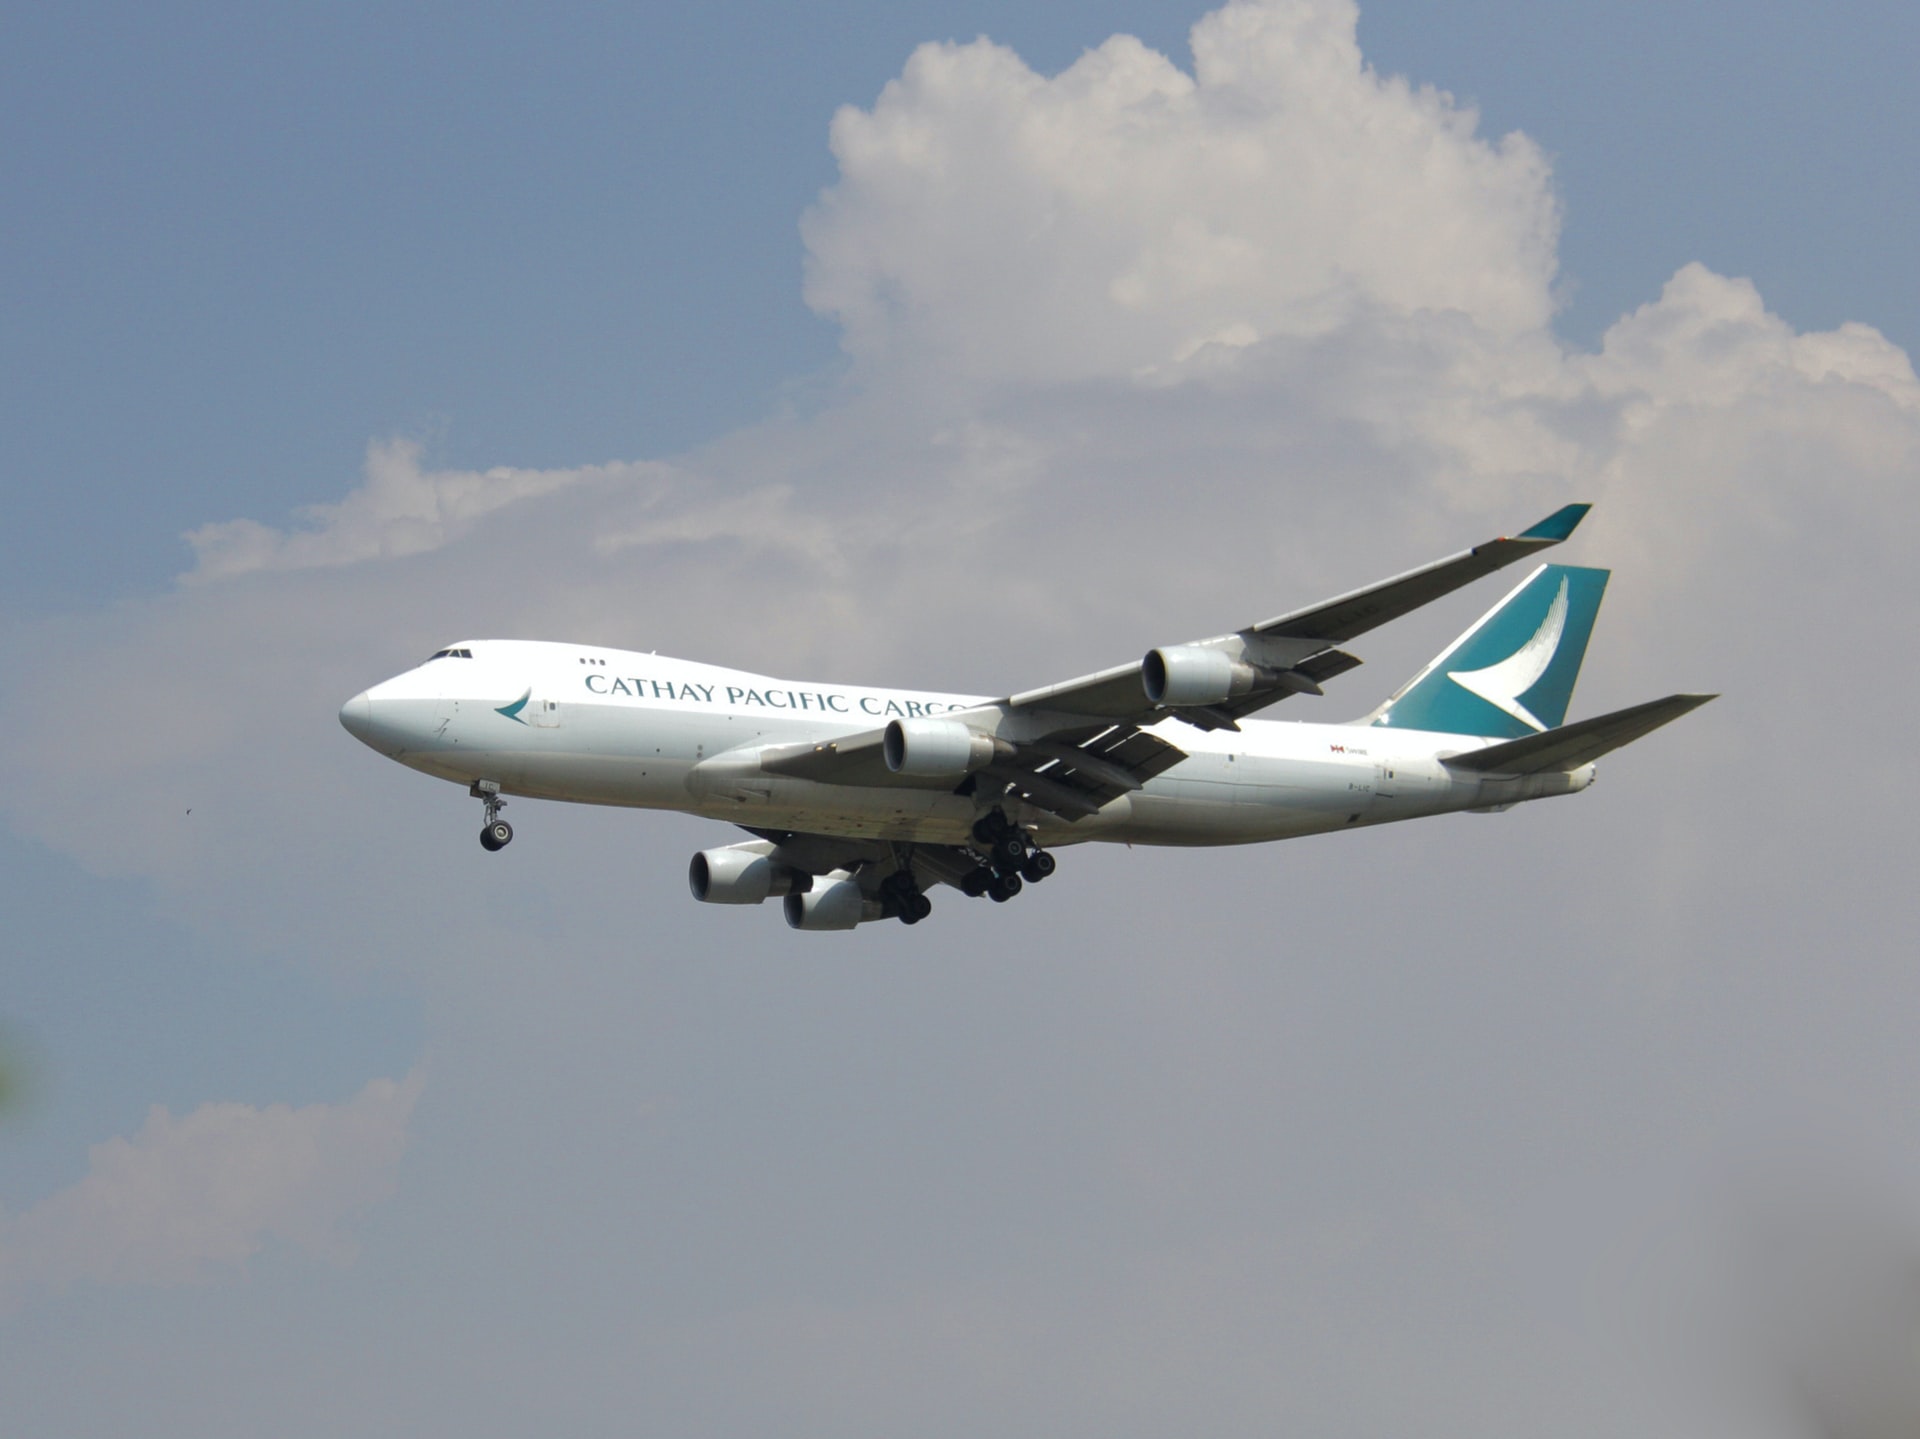 Cathay Pacific aircraft in flight over a cloudy sky.